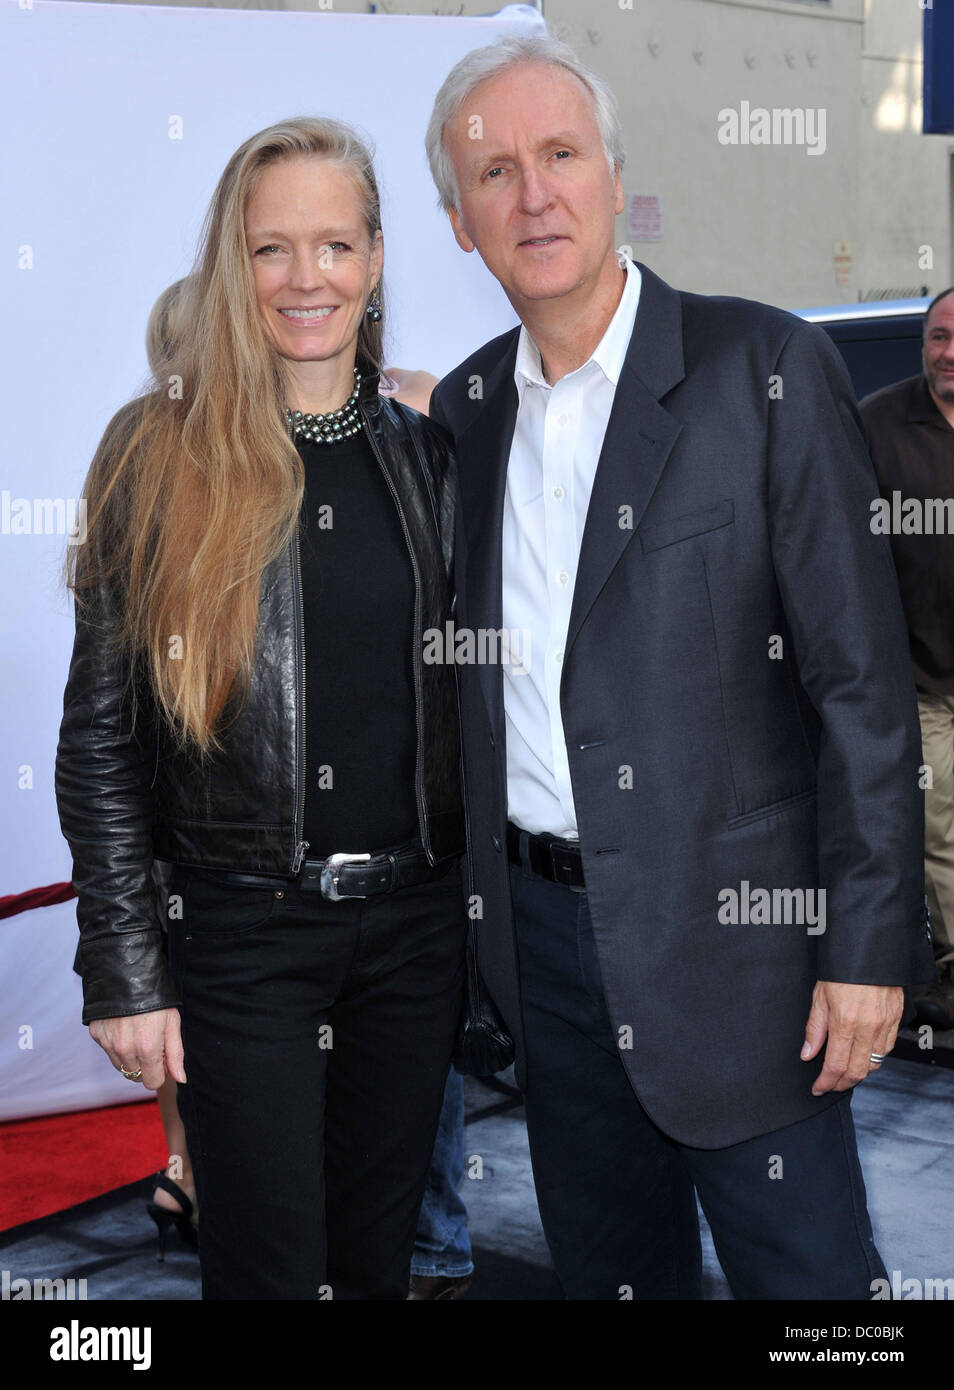 Suzy Amis and James Cameron The Cirque Du Soleil world premiere of 'Iris: A Journey Into The World Of Cinema' held at the Kodak Theatre Los Angeles, California - 25.09.11 Stock Photo